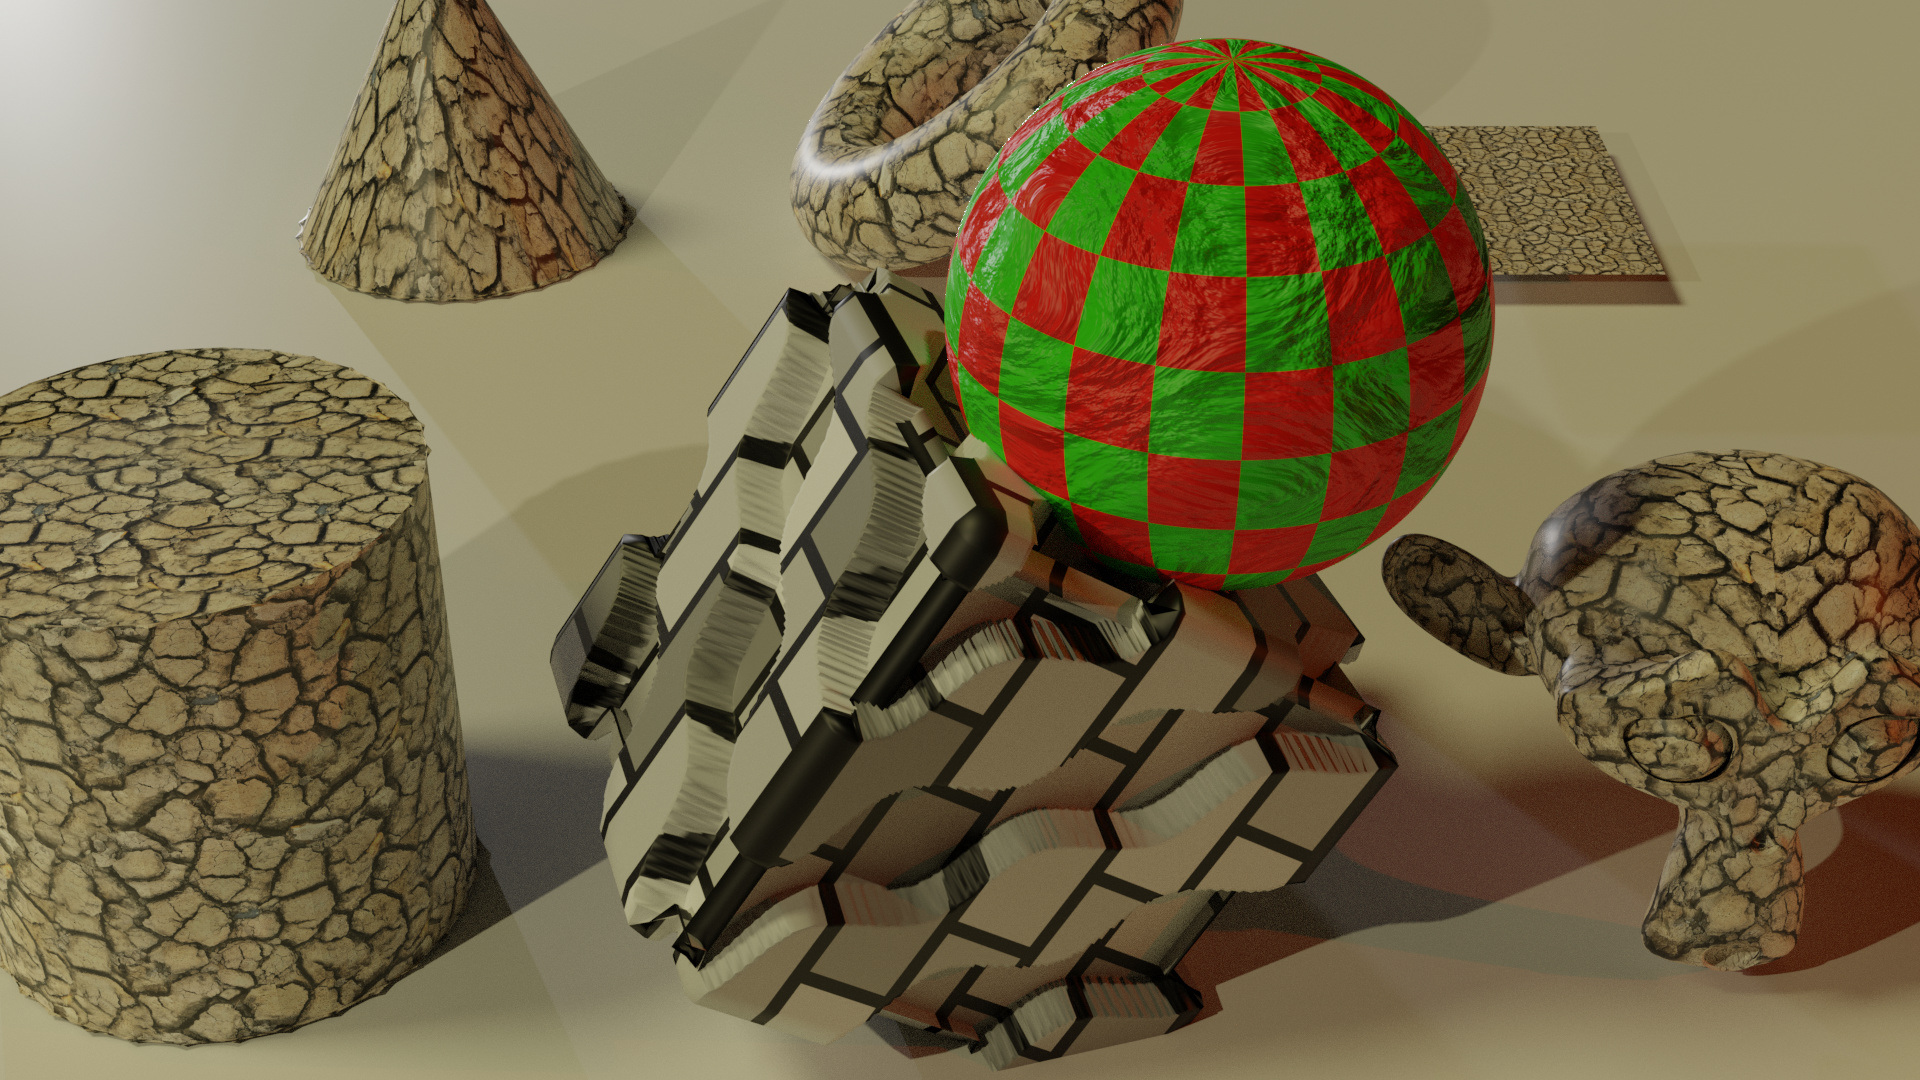 Section_02_Procedural_Materials_01_Cycles_02